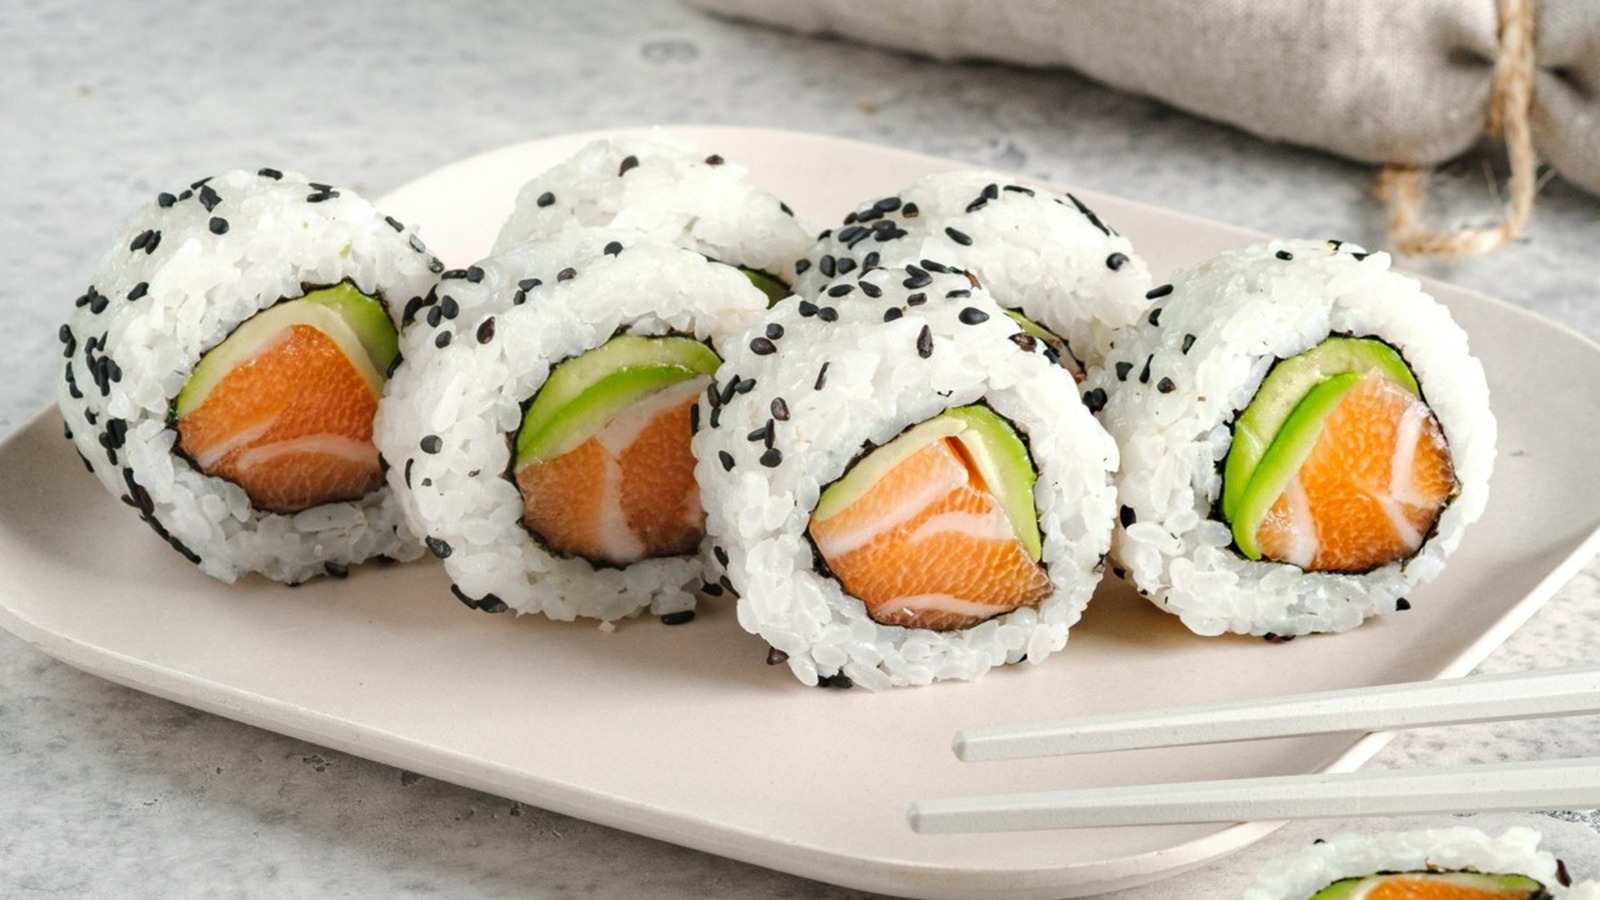 No Mat? This Hack Makes Sushi Perfectly With A Clever Substitute